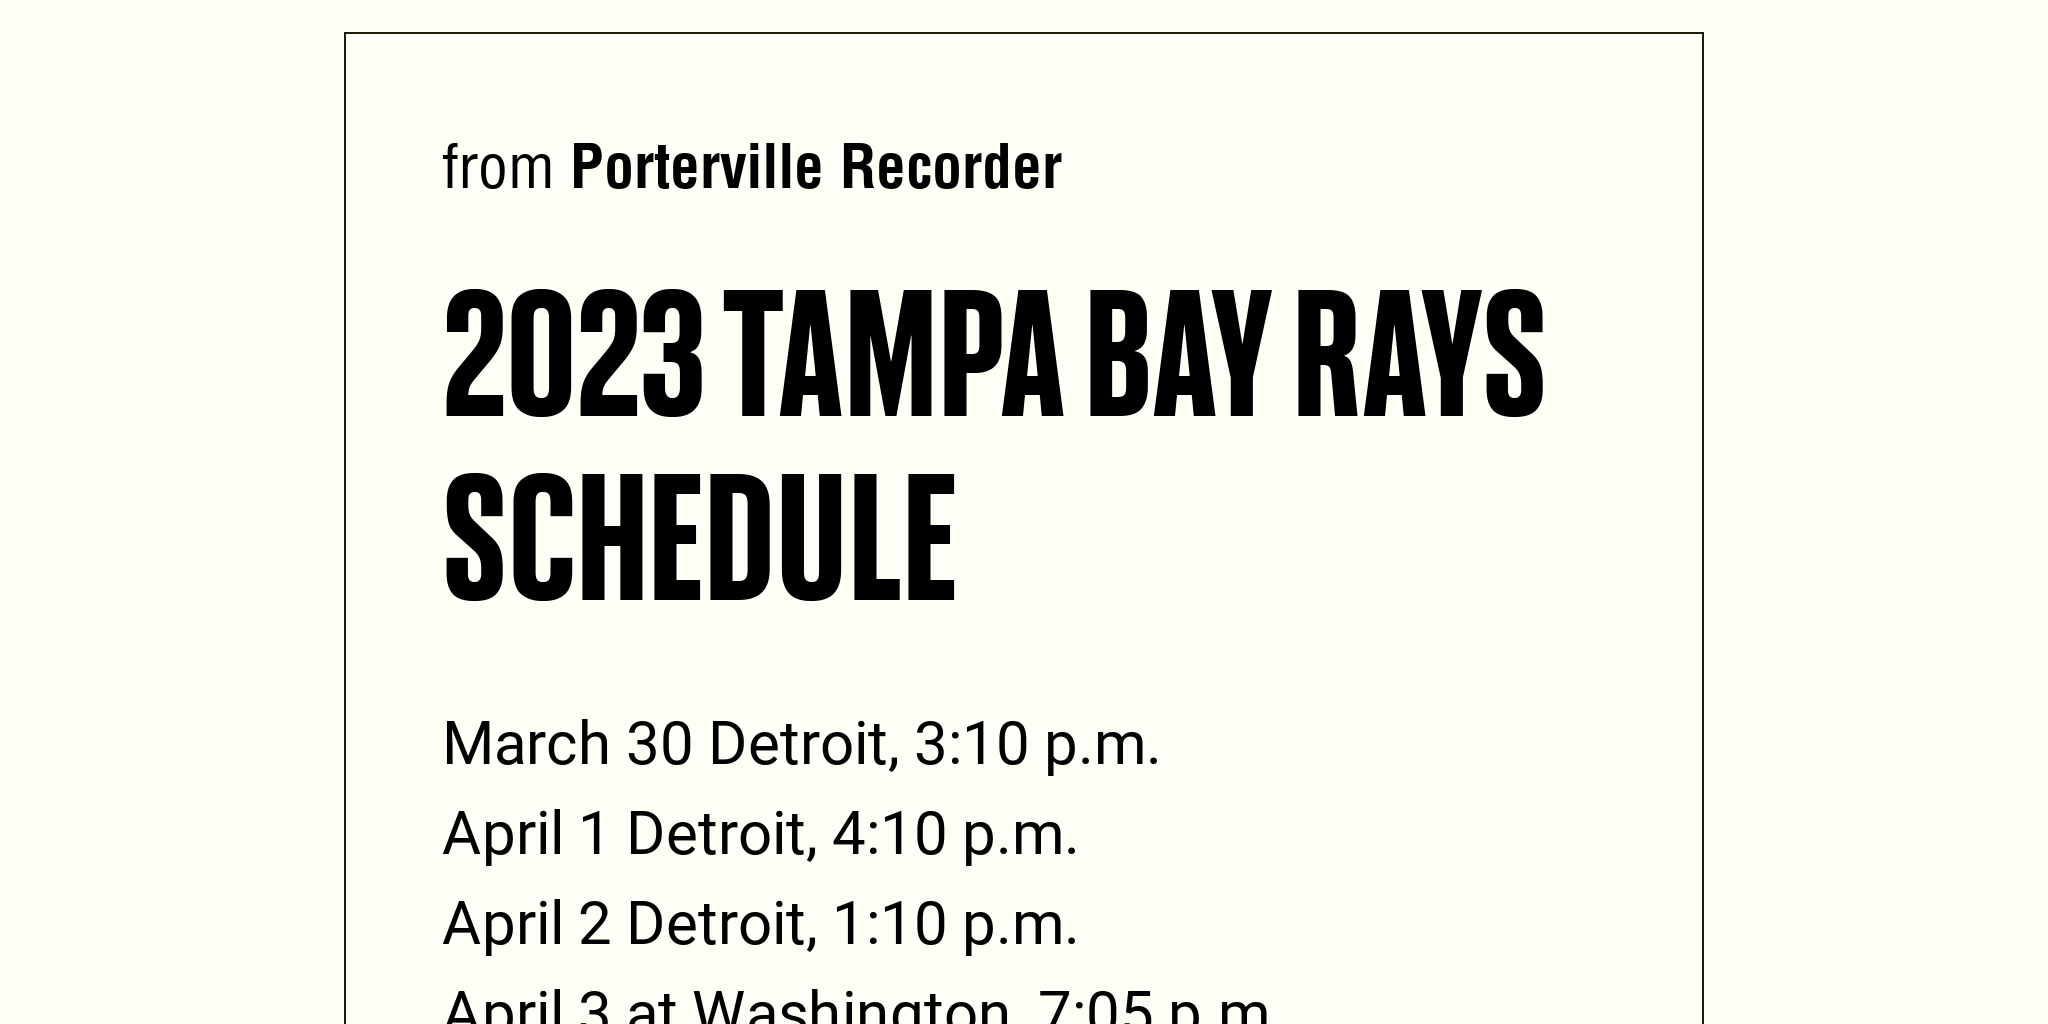 2023 Tampa Bay Rays Schedule Briefly